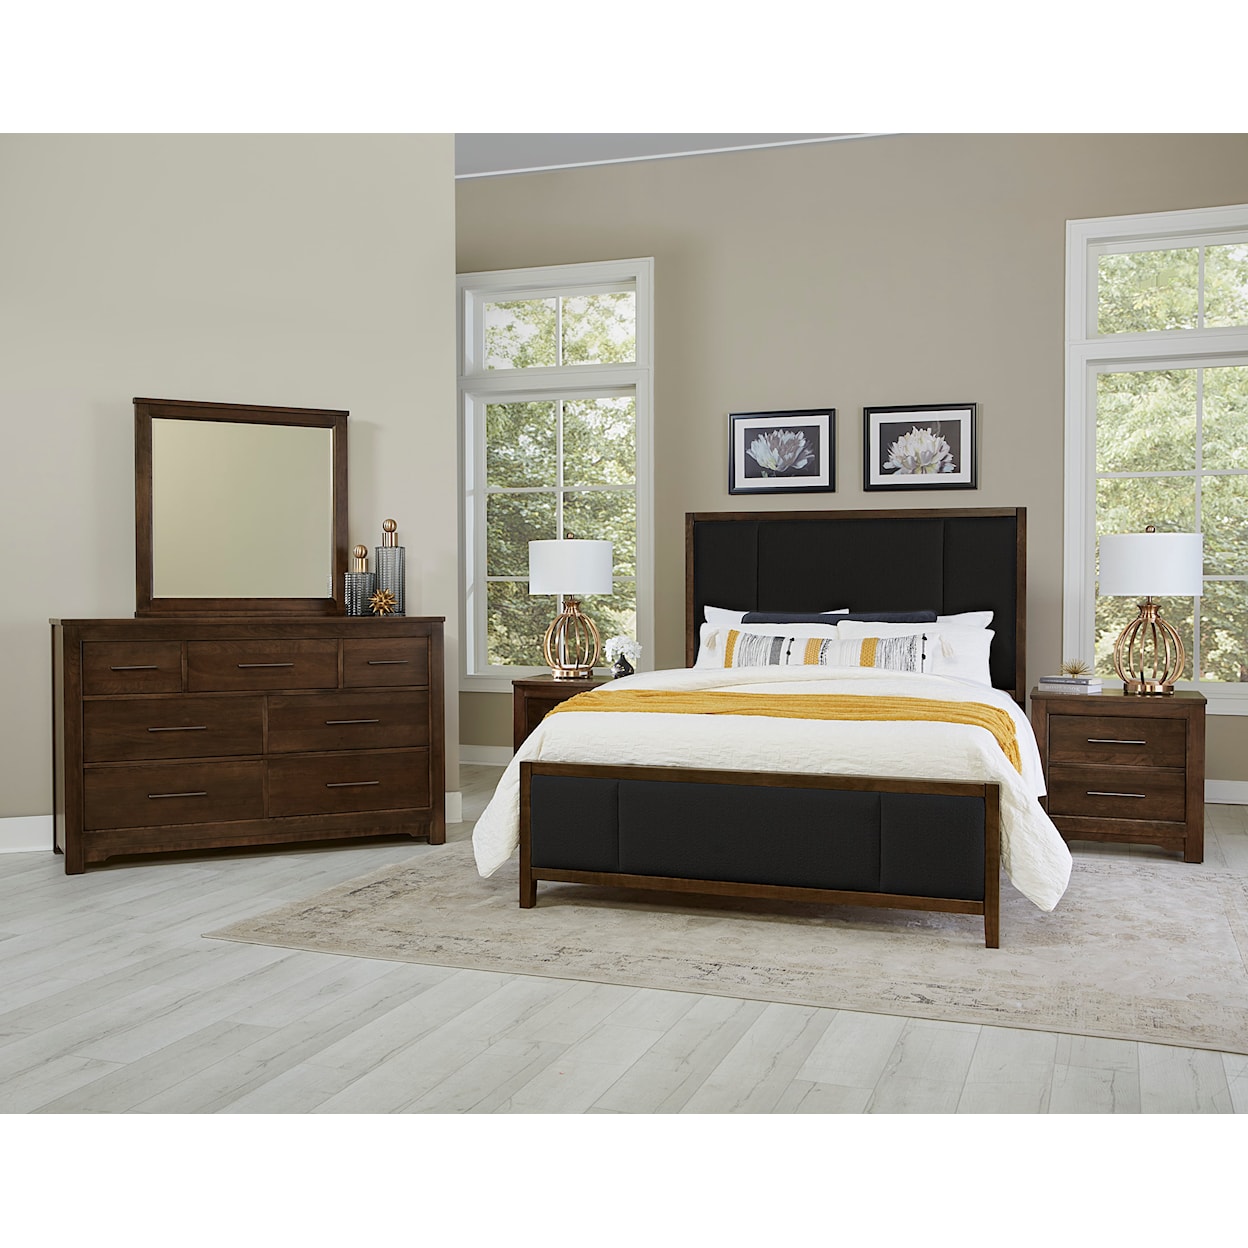 Artisan & Post Crafted Cherry King Upholstered Panel Bed